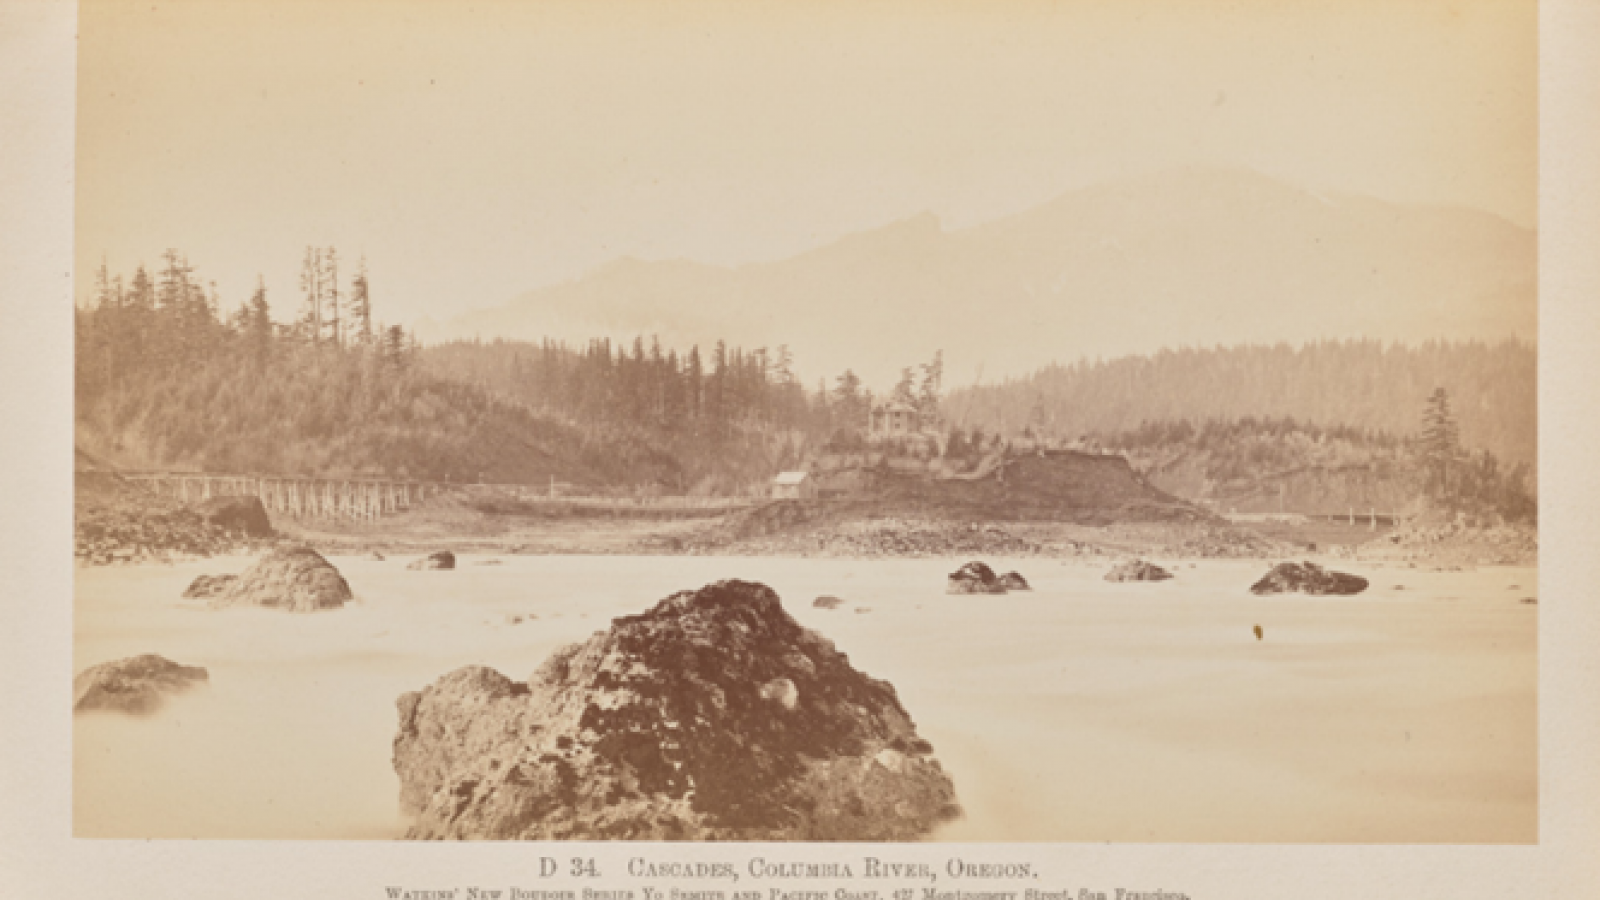 Photo from approximately 1883 of the Columbia River in Oregon